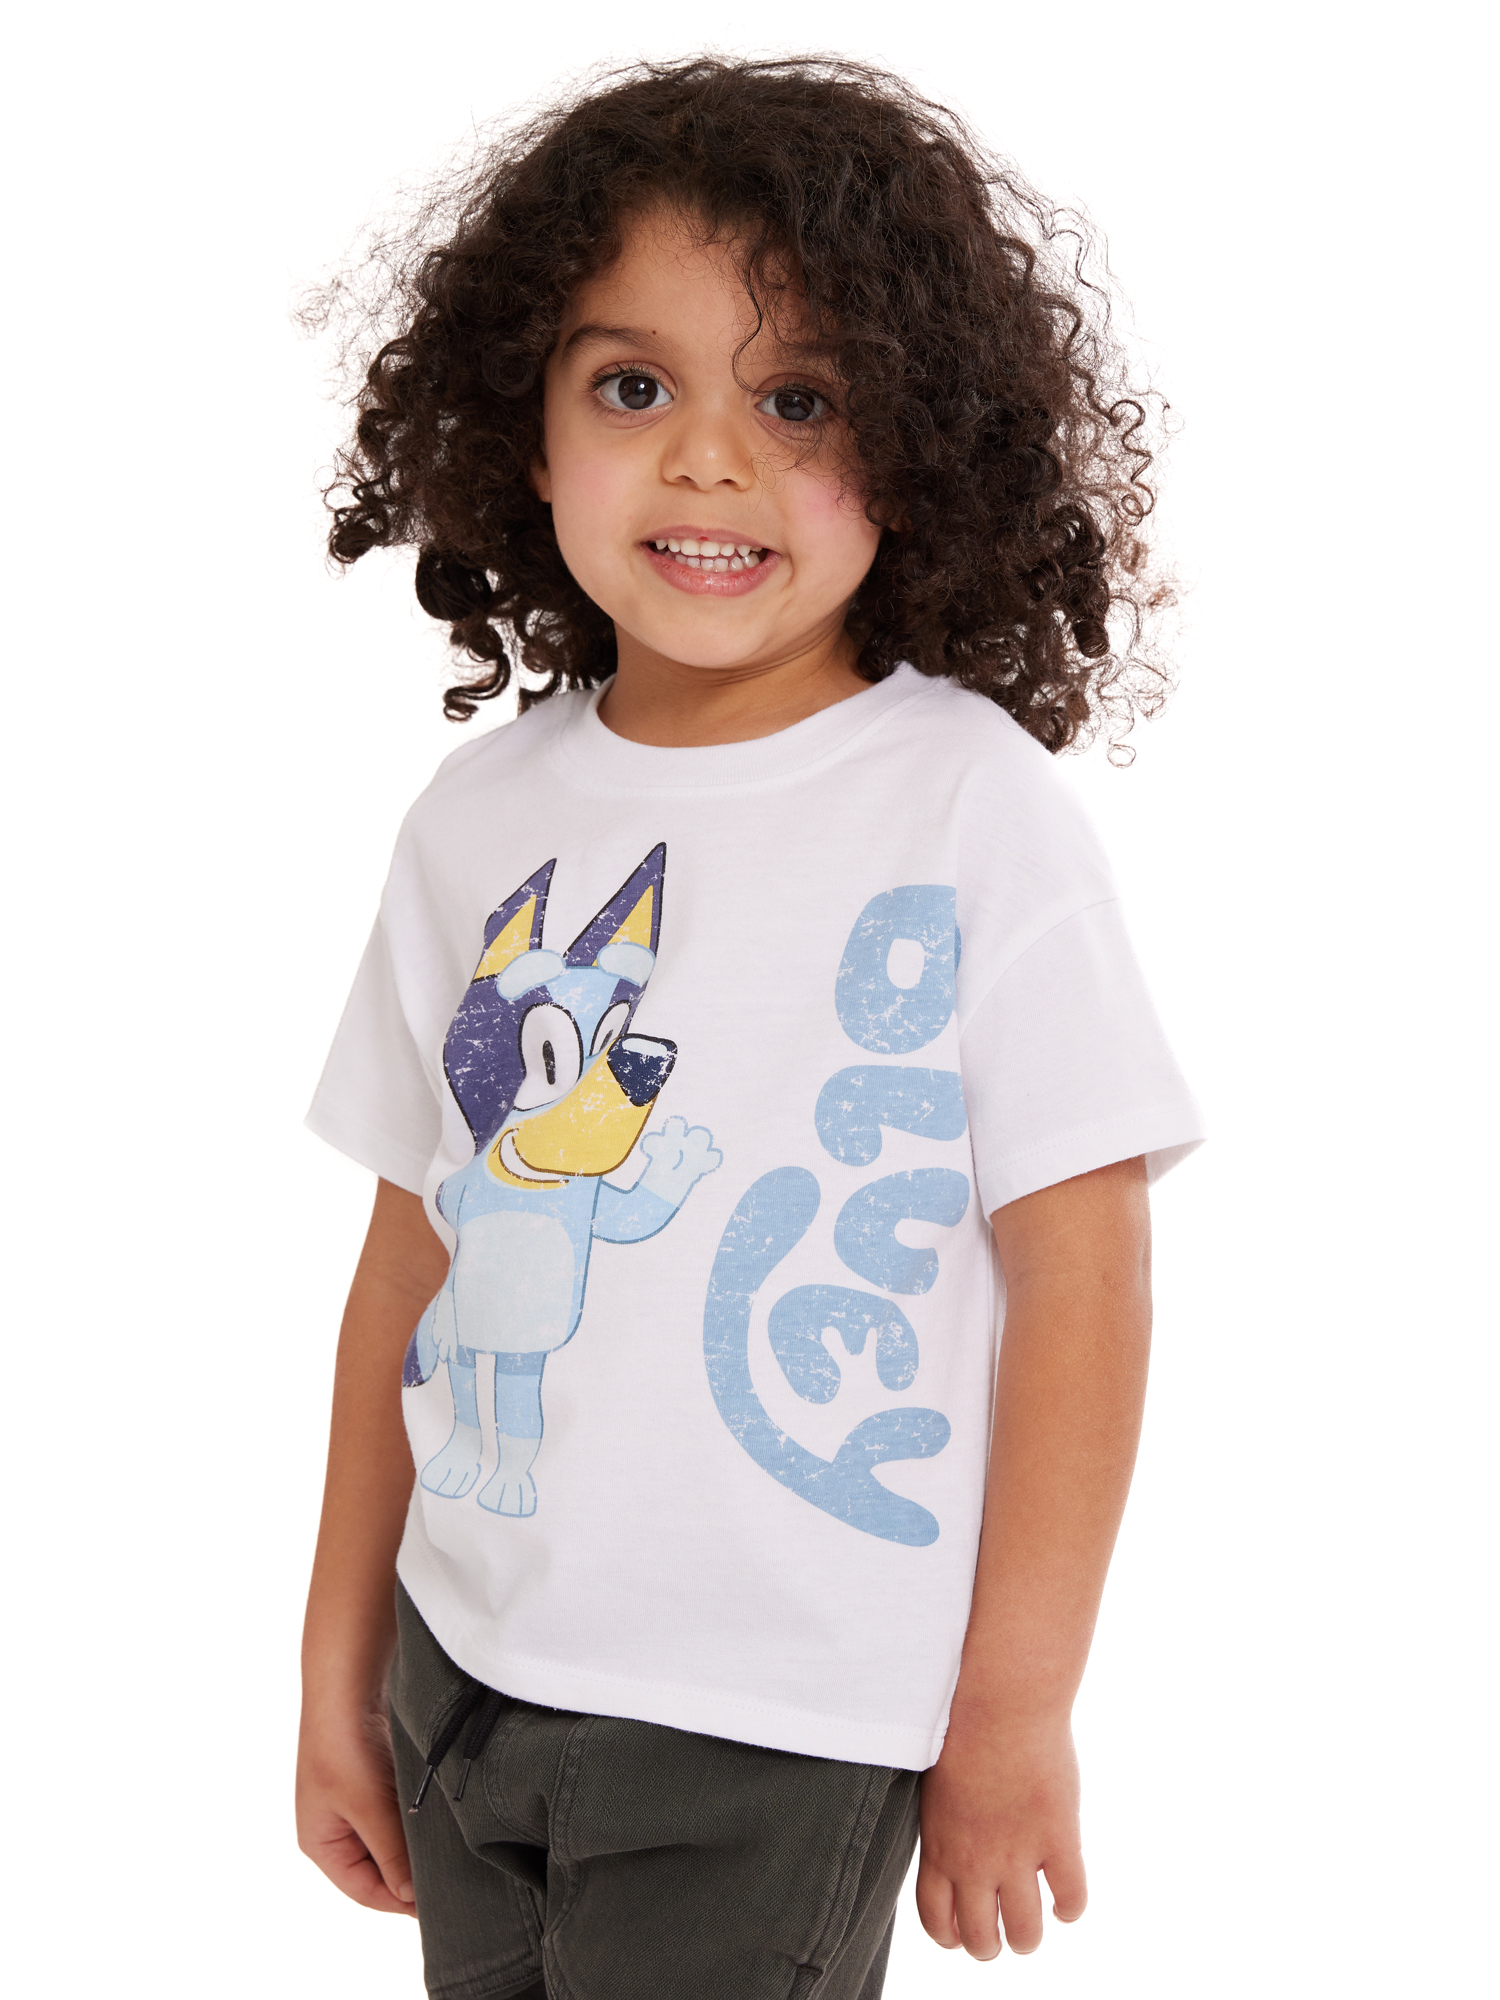 Bluey Toddler Boy Graphic Tees, 2-Pack, Sizes 2T-5T - image 5 of 7